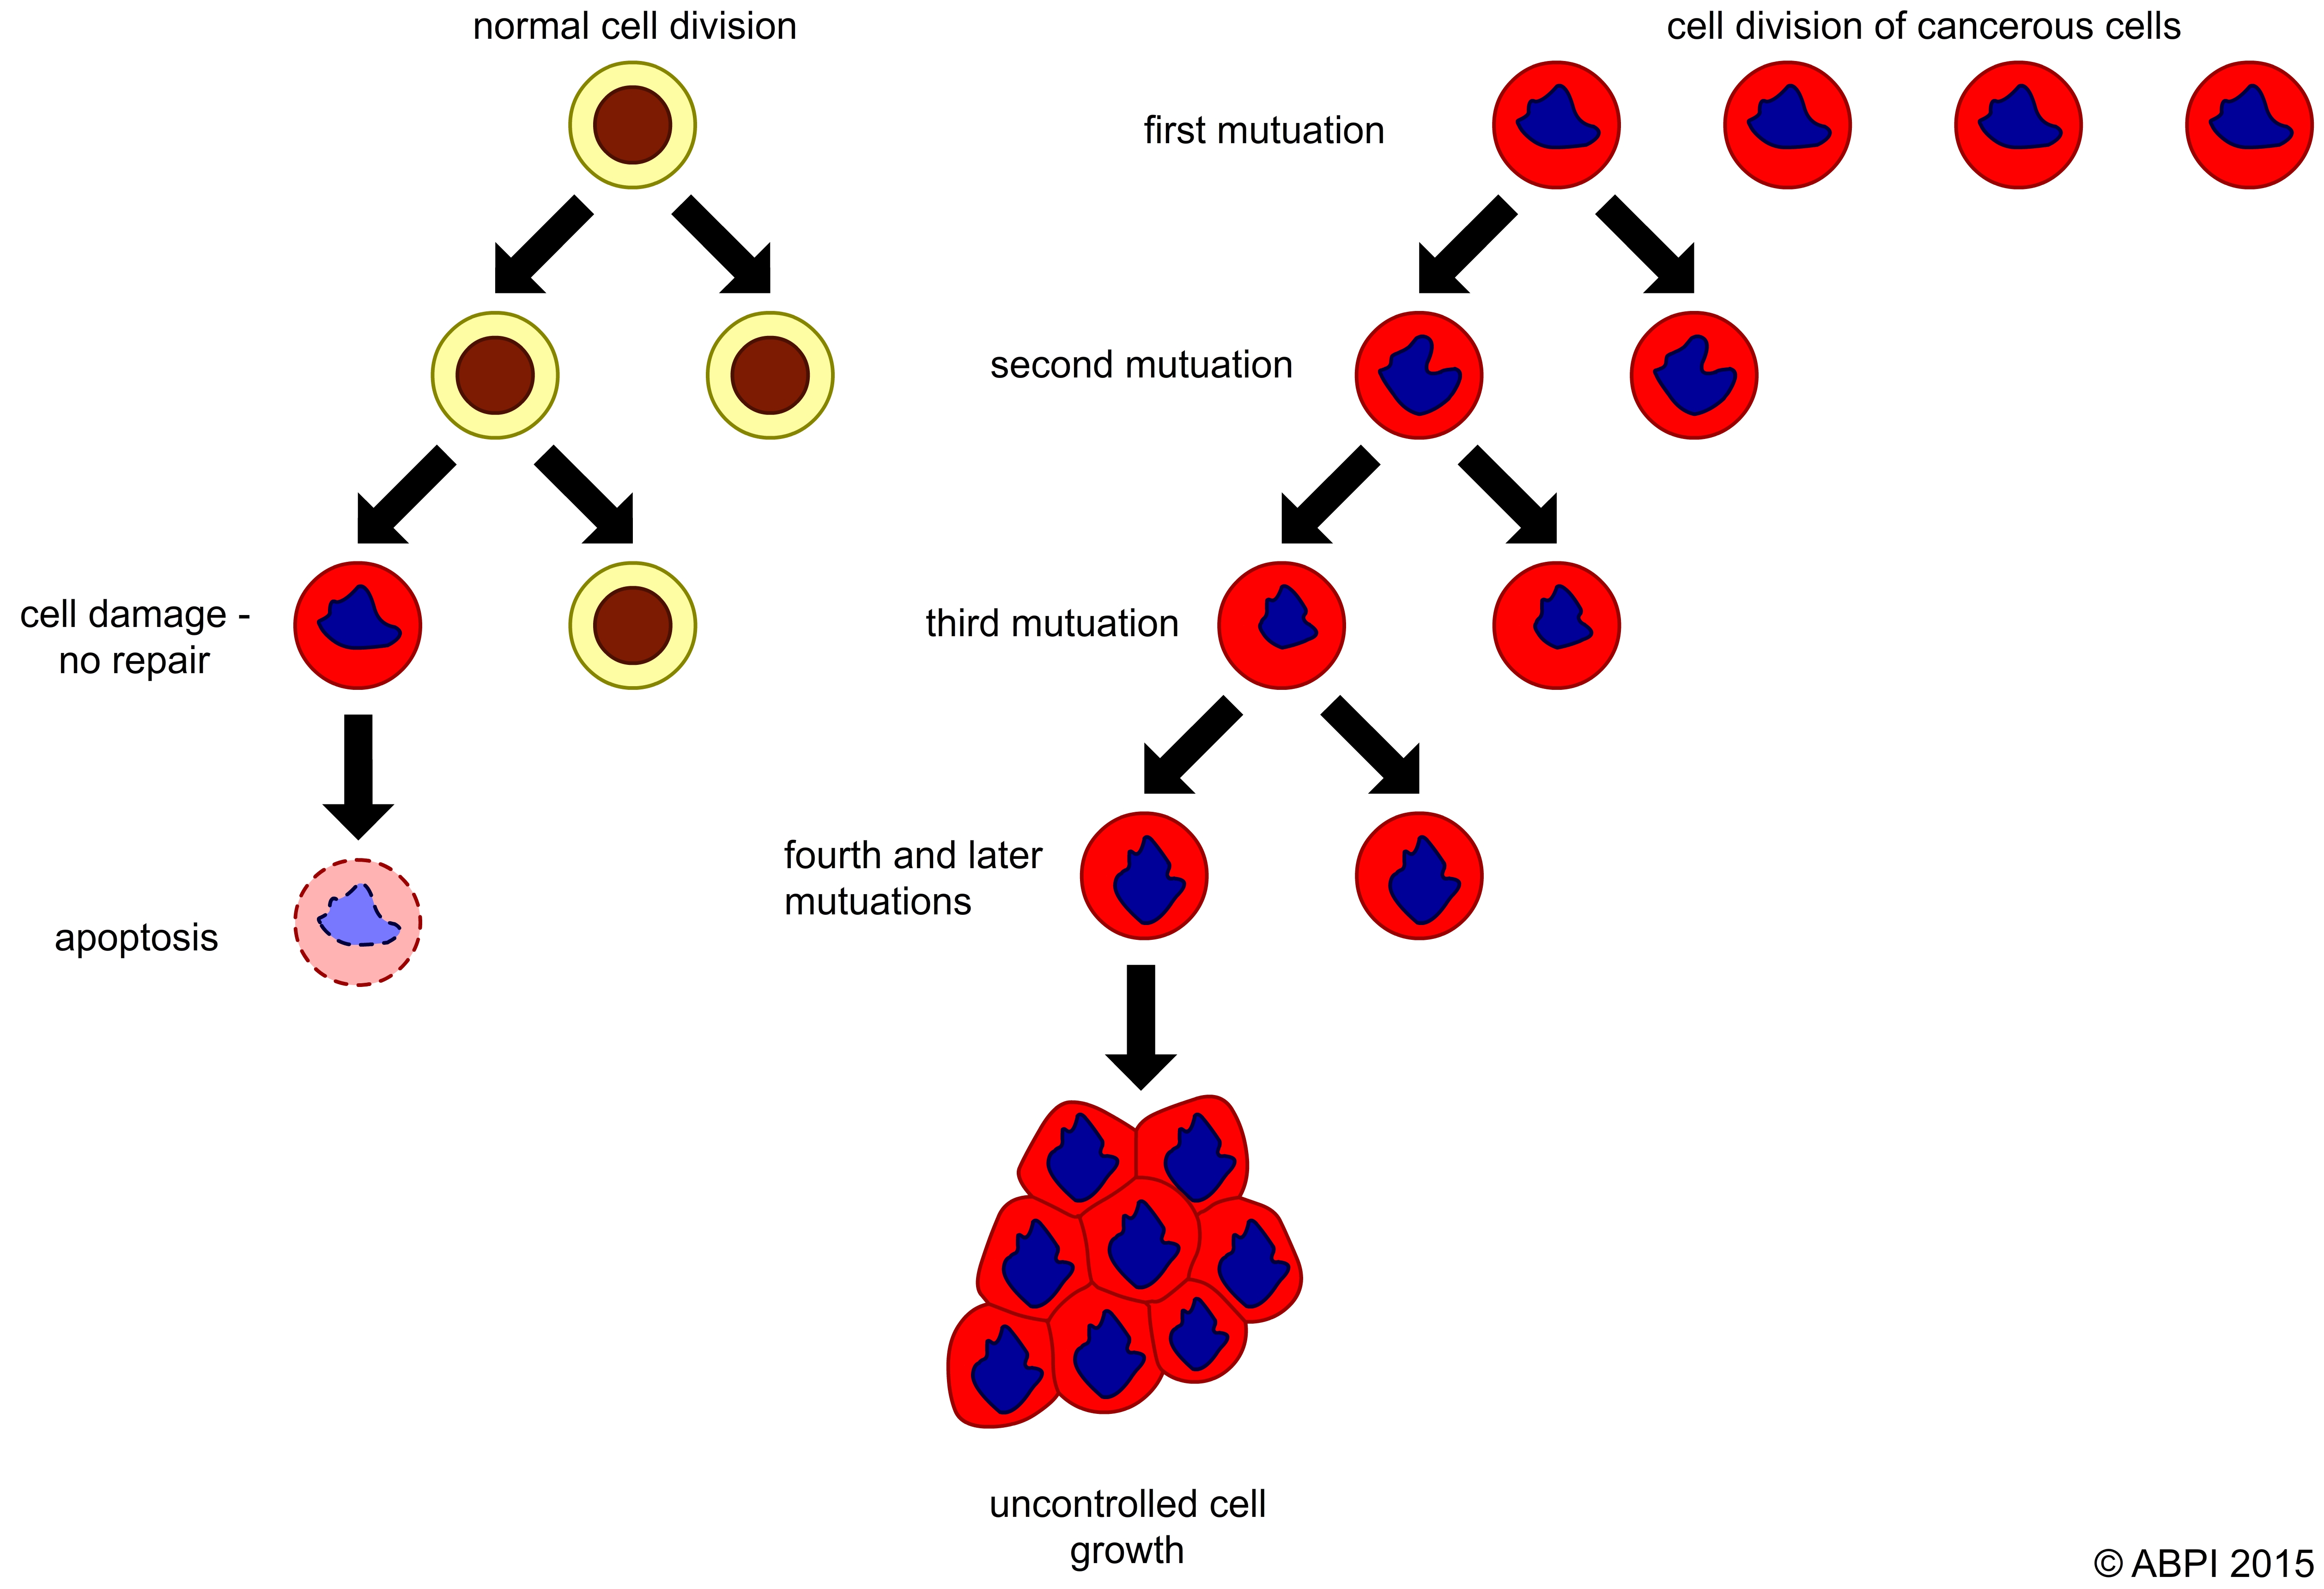 Normal cell division and the development of cancer